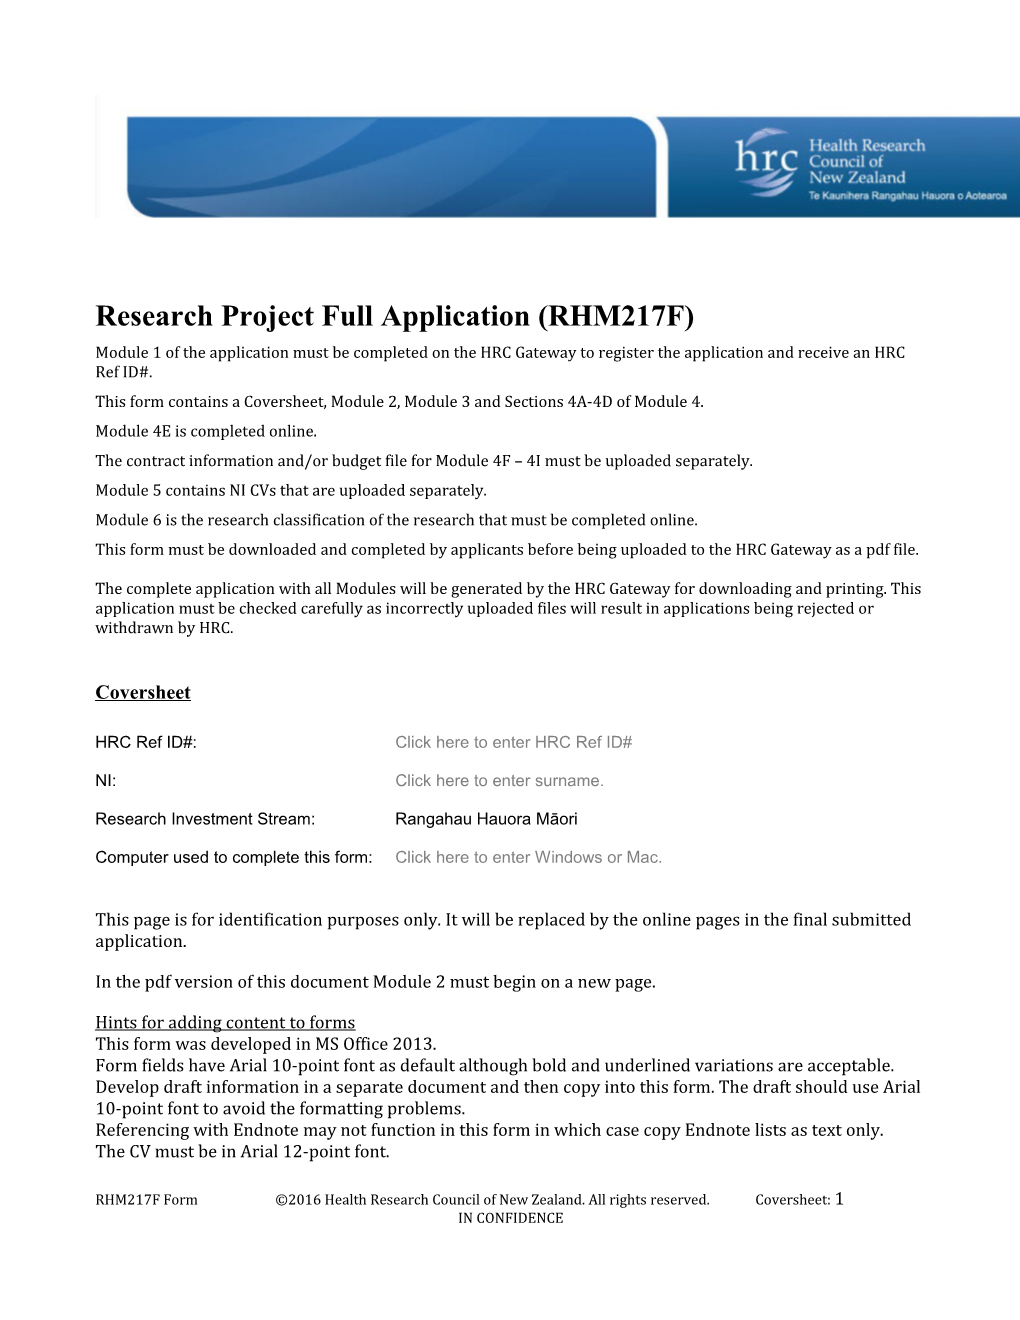 Research Project Full Application (RHM217F)